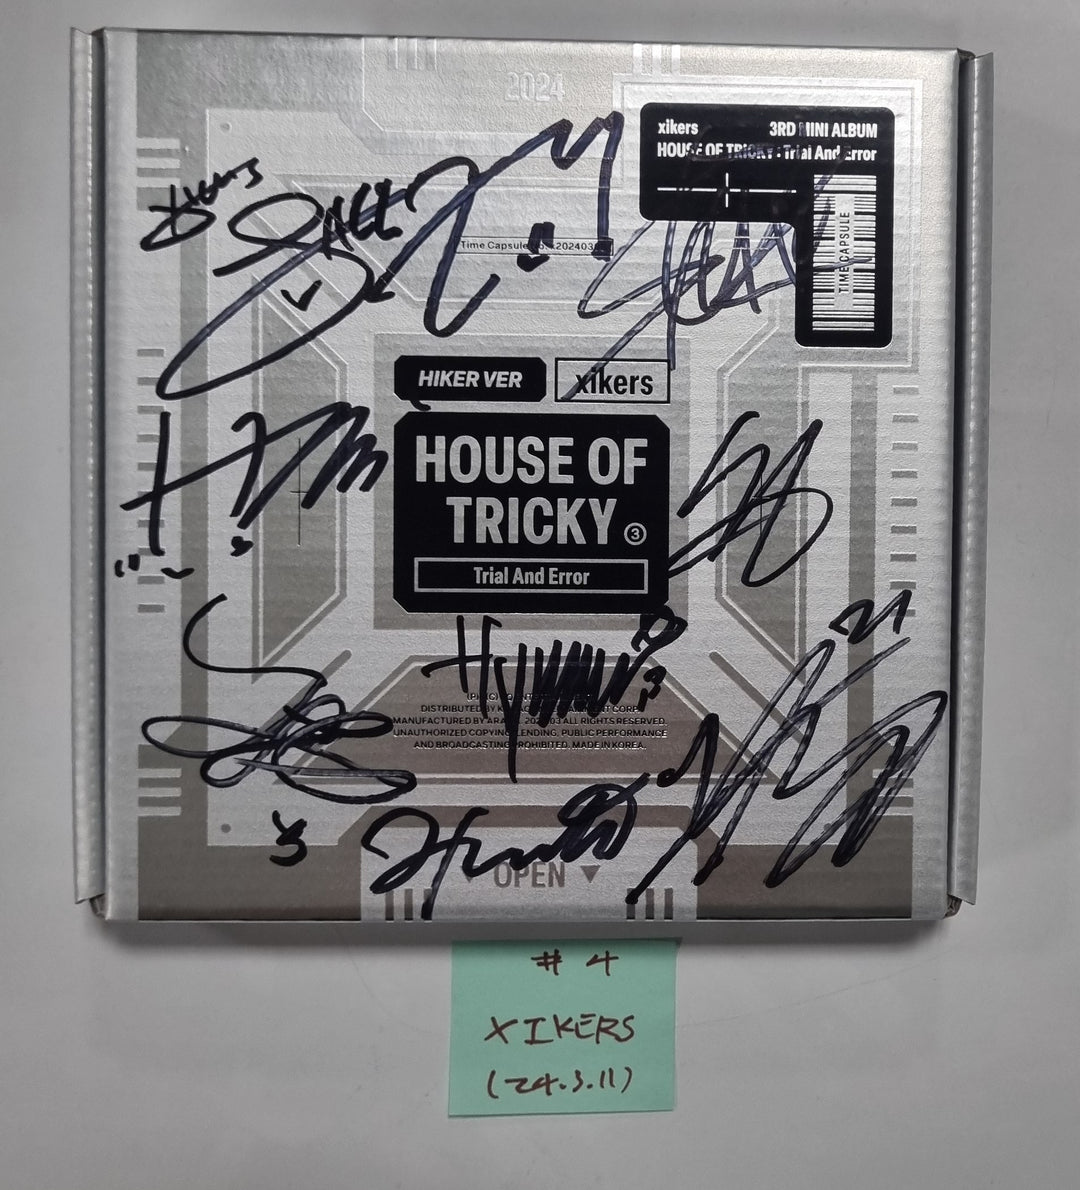 Xikers "HOUSE OF TRICKY : Trial And Error" - Hand Autographed(Signed) Promo Album [24.3.11]